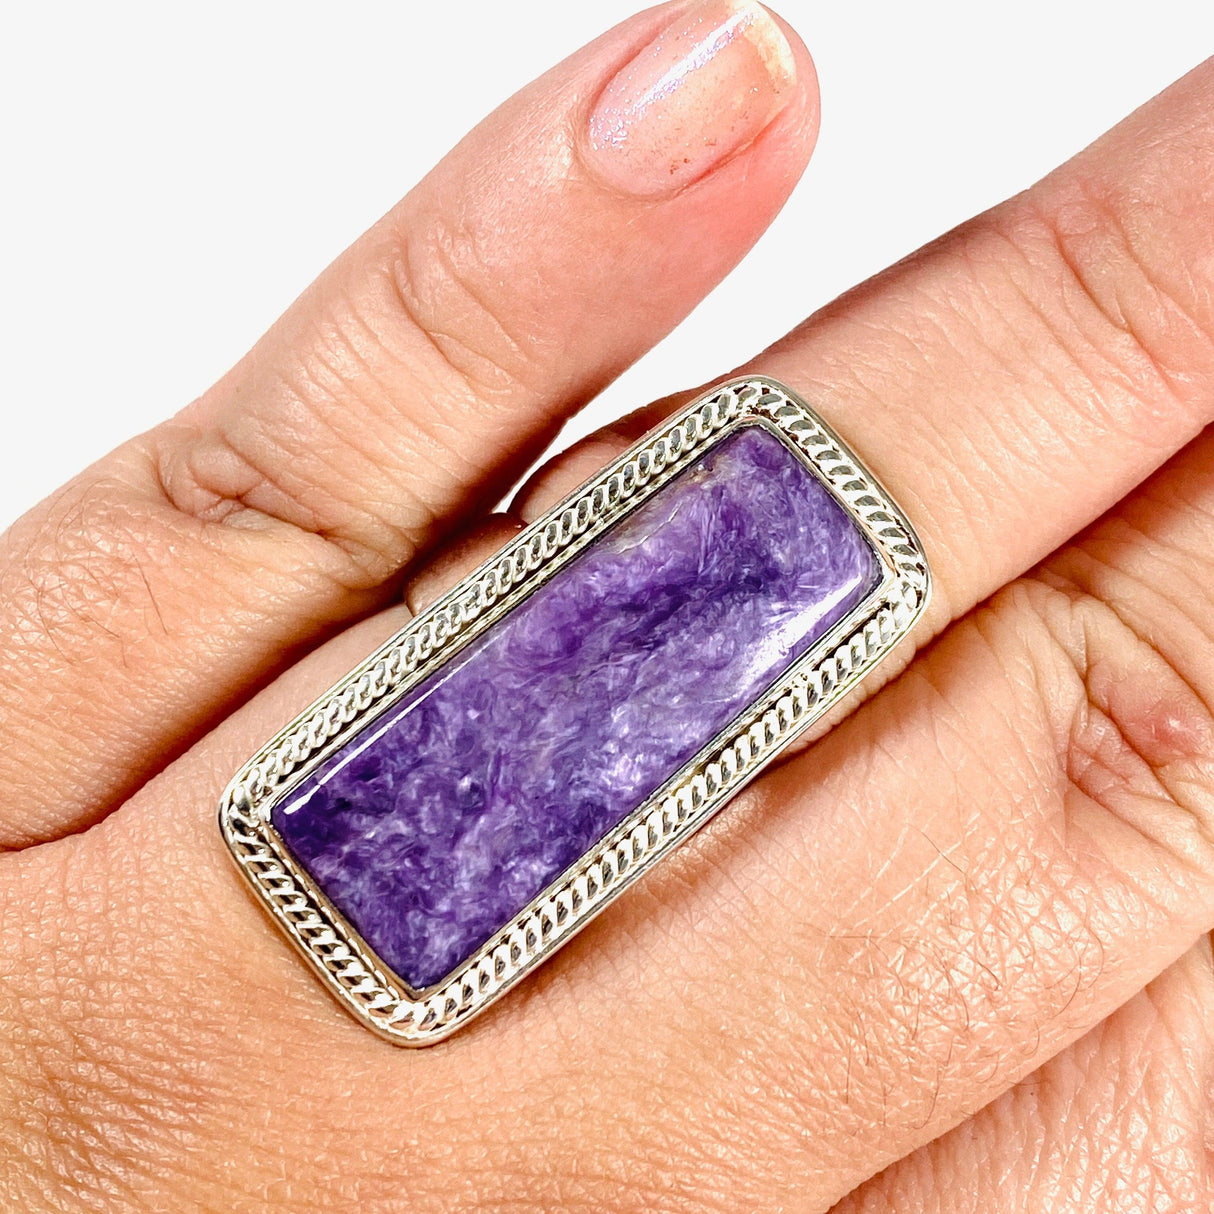 Purple Charoite rectangle ring in sterling silver shown on a hand